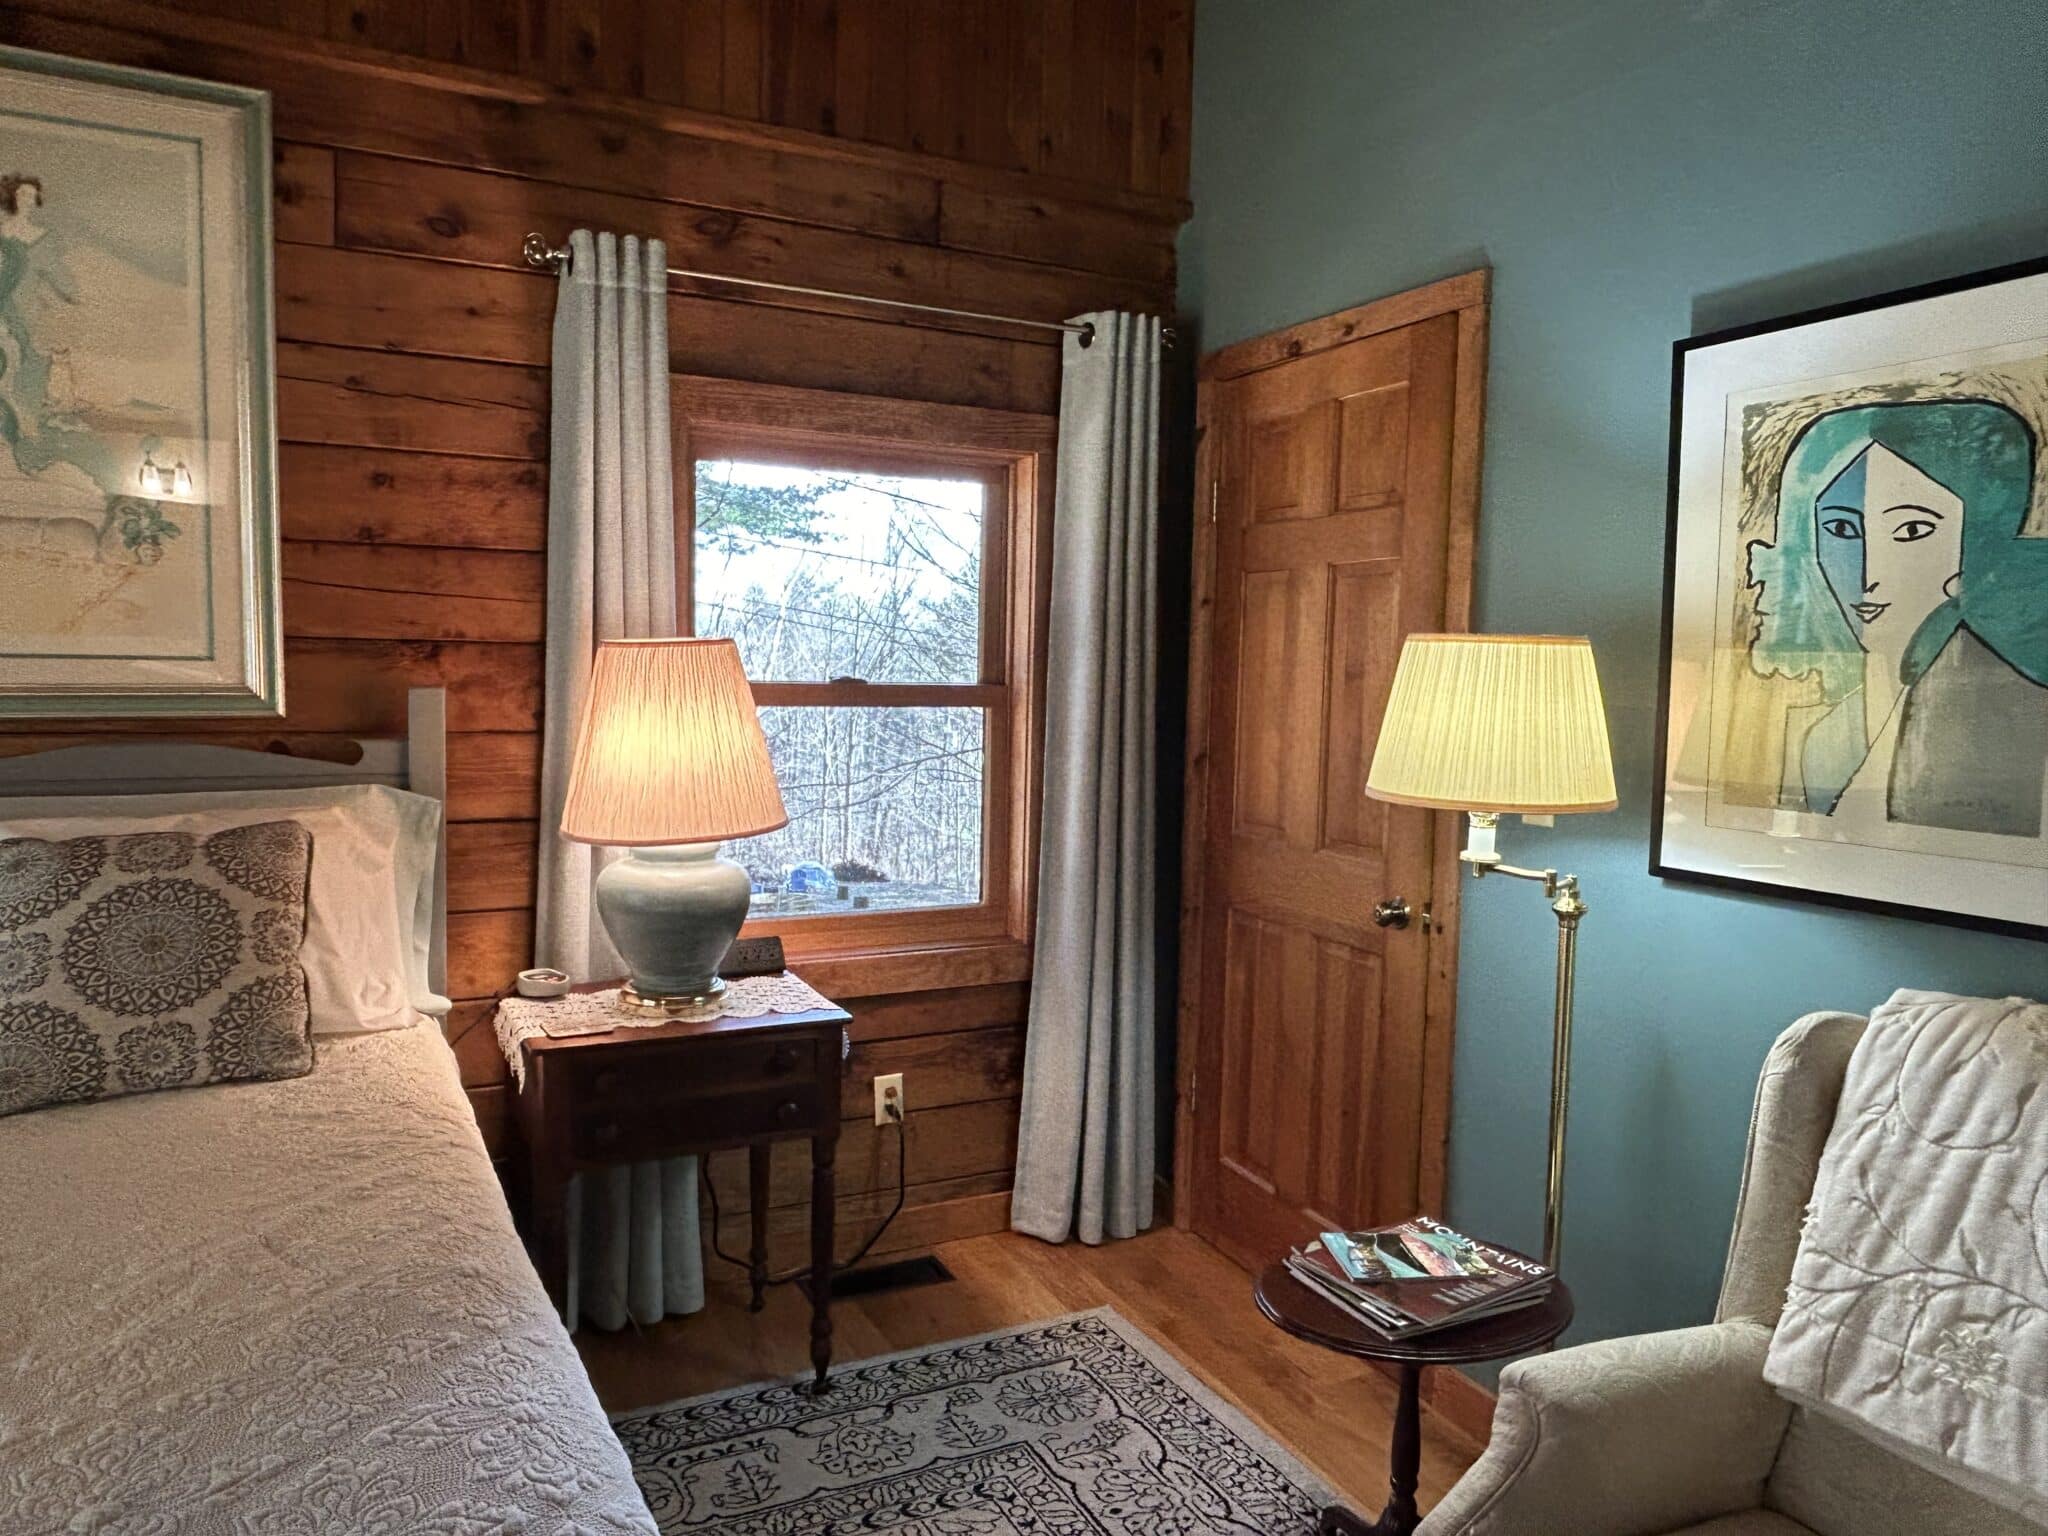 The bed has a white quilted spread with aqua patterned pillows. The nightstand has a turquoise lamp on a doily. The wingback chair is off-white with a velvet throw.  The window looks out over the fire pit.